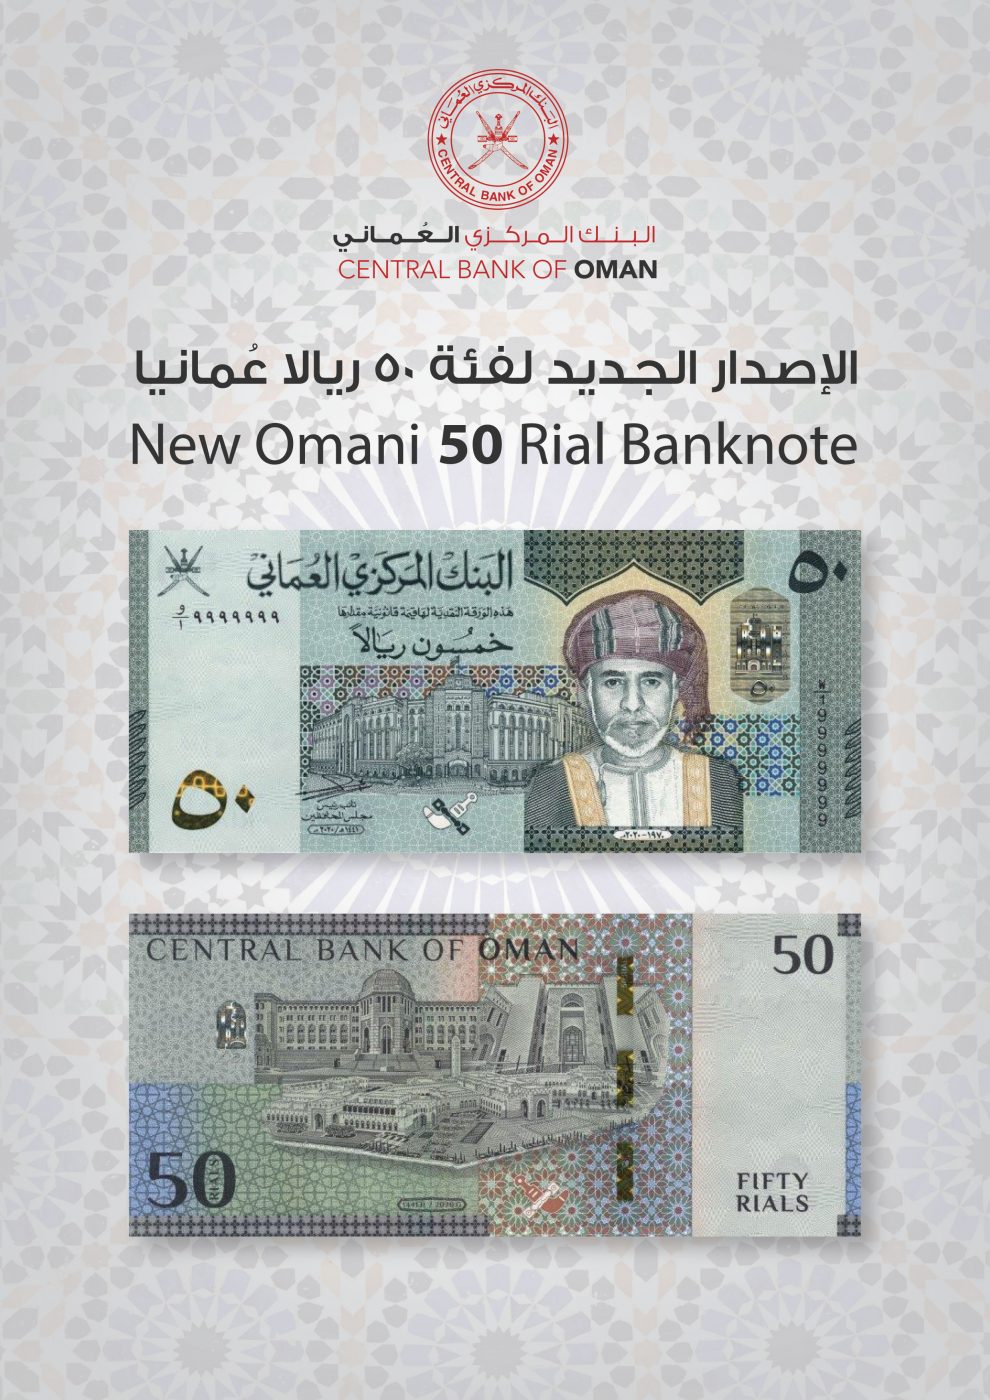 Oman New commemorative banknote, Sixth family of notes announced